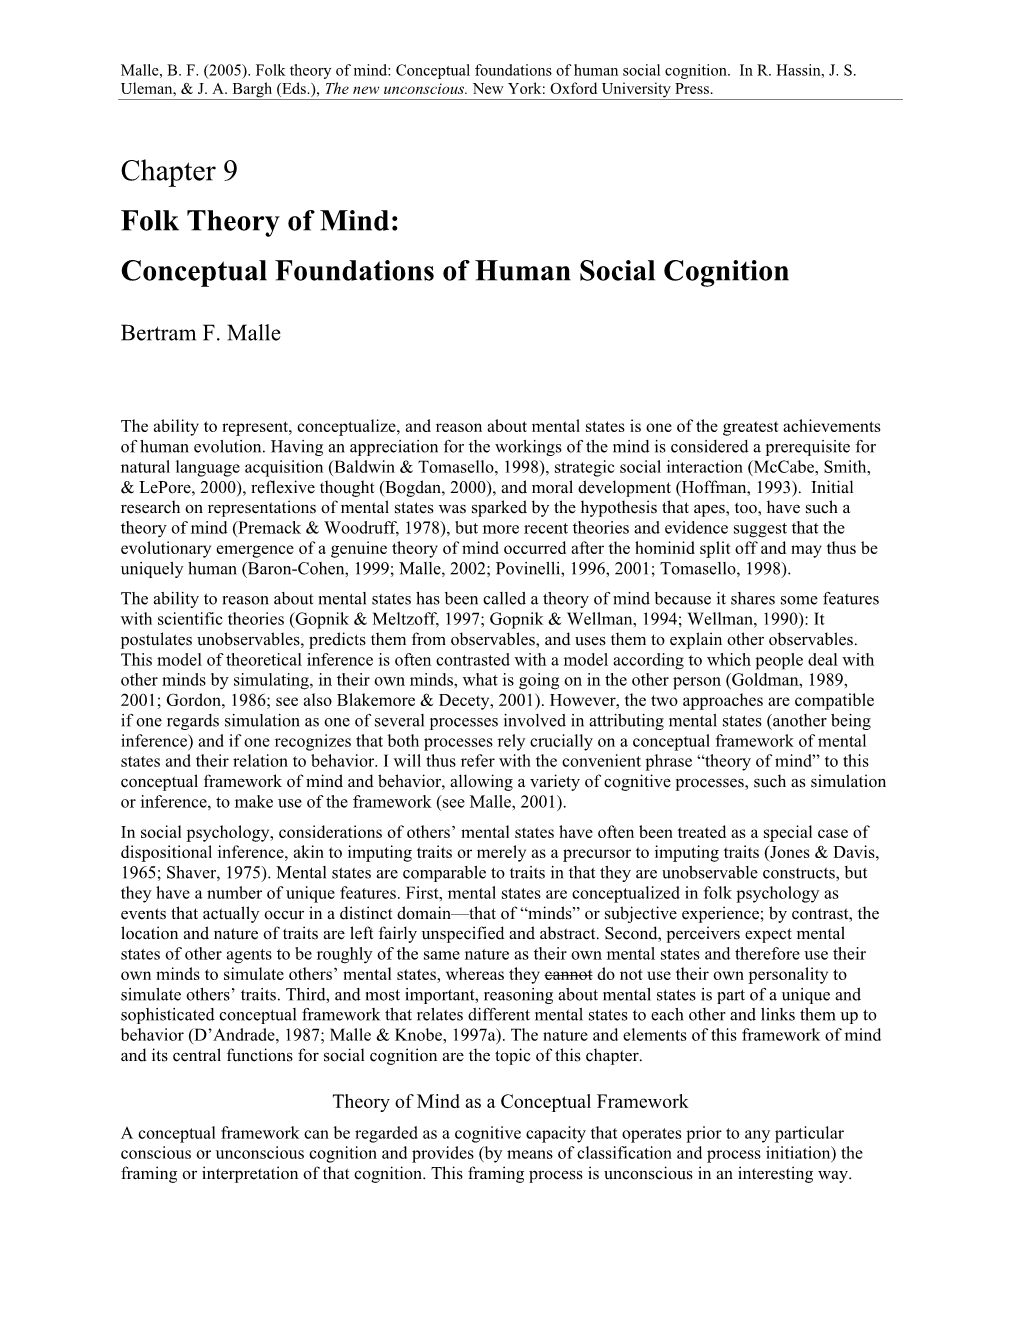 Folk Theory of Mind: Conceptual Foundations of Human Social Cognition